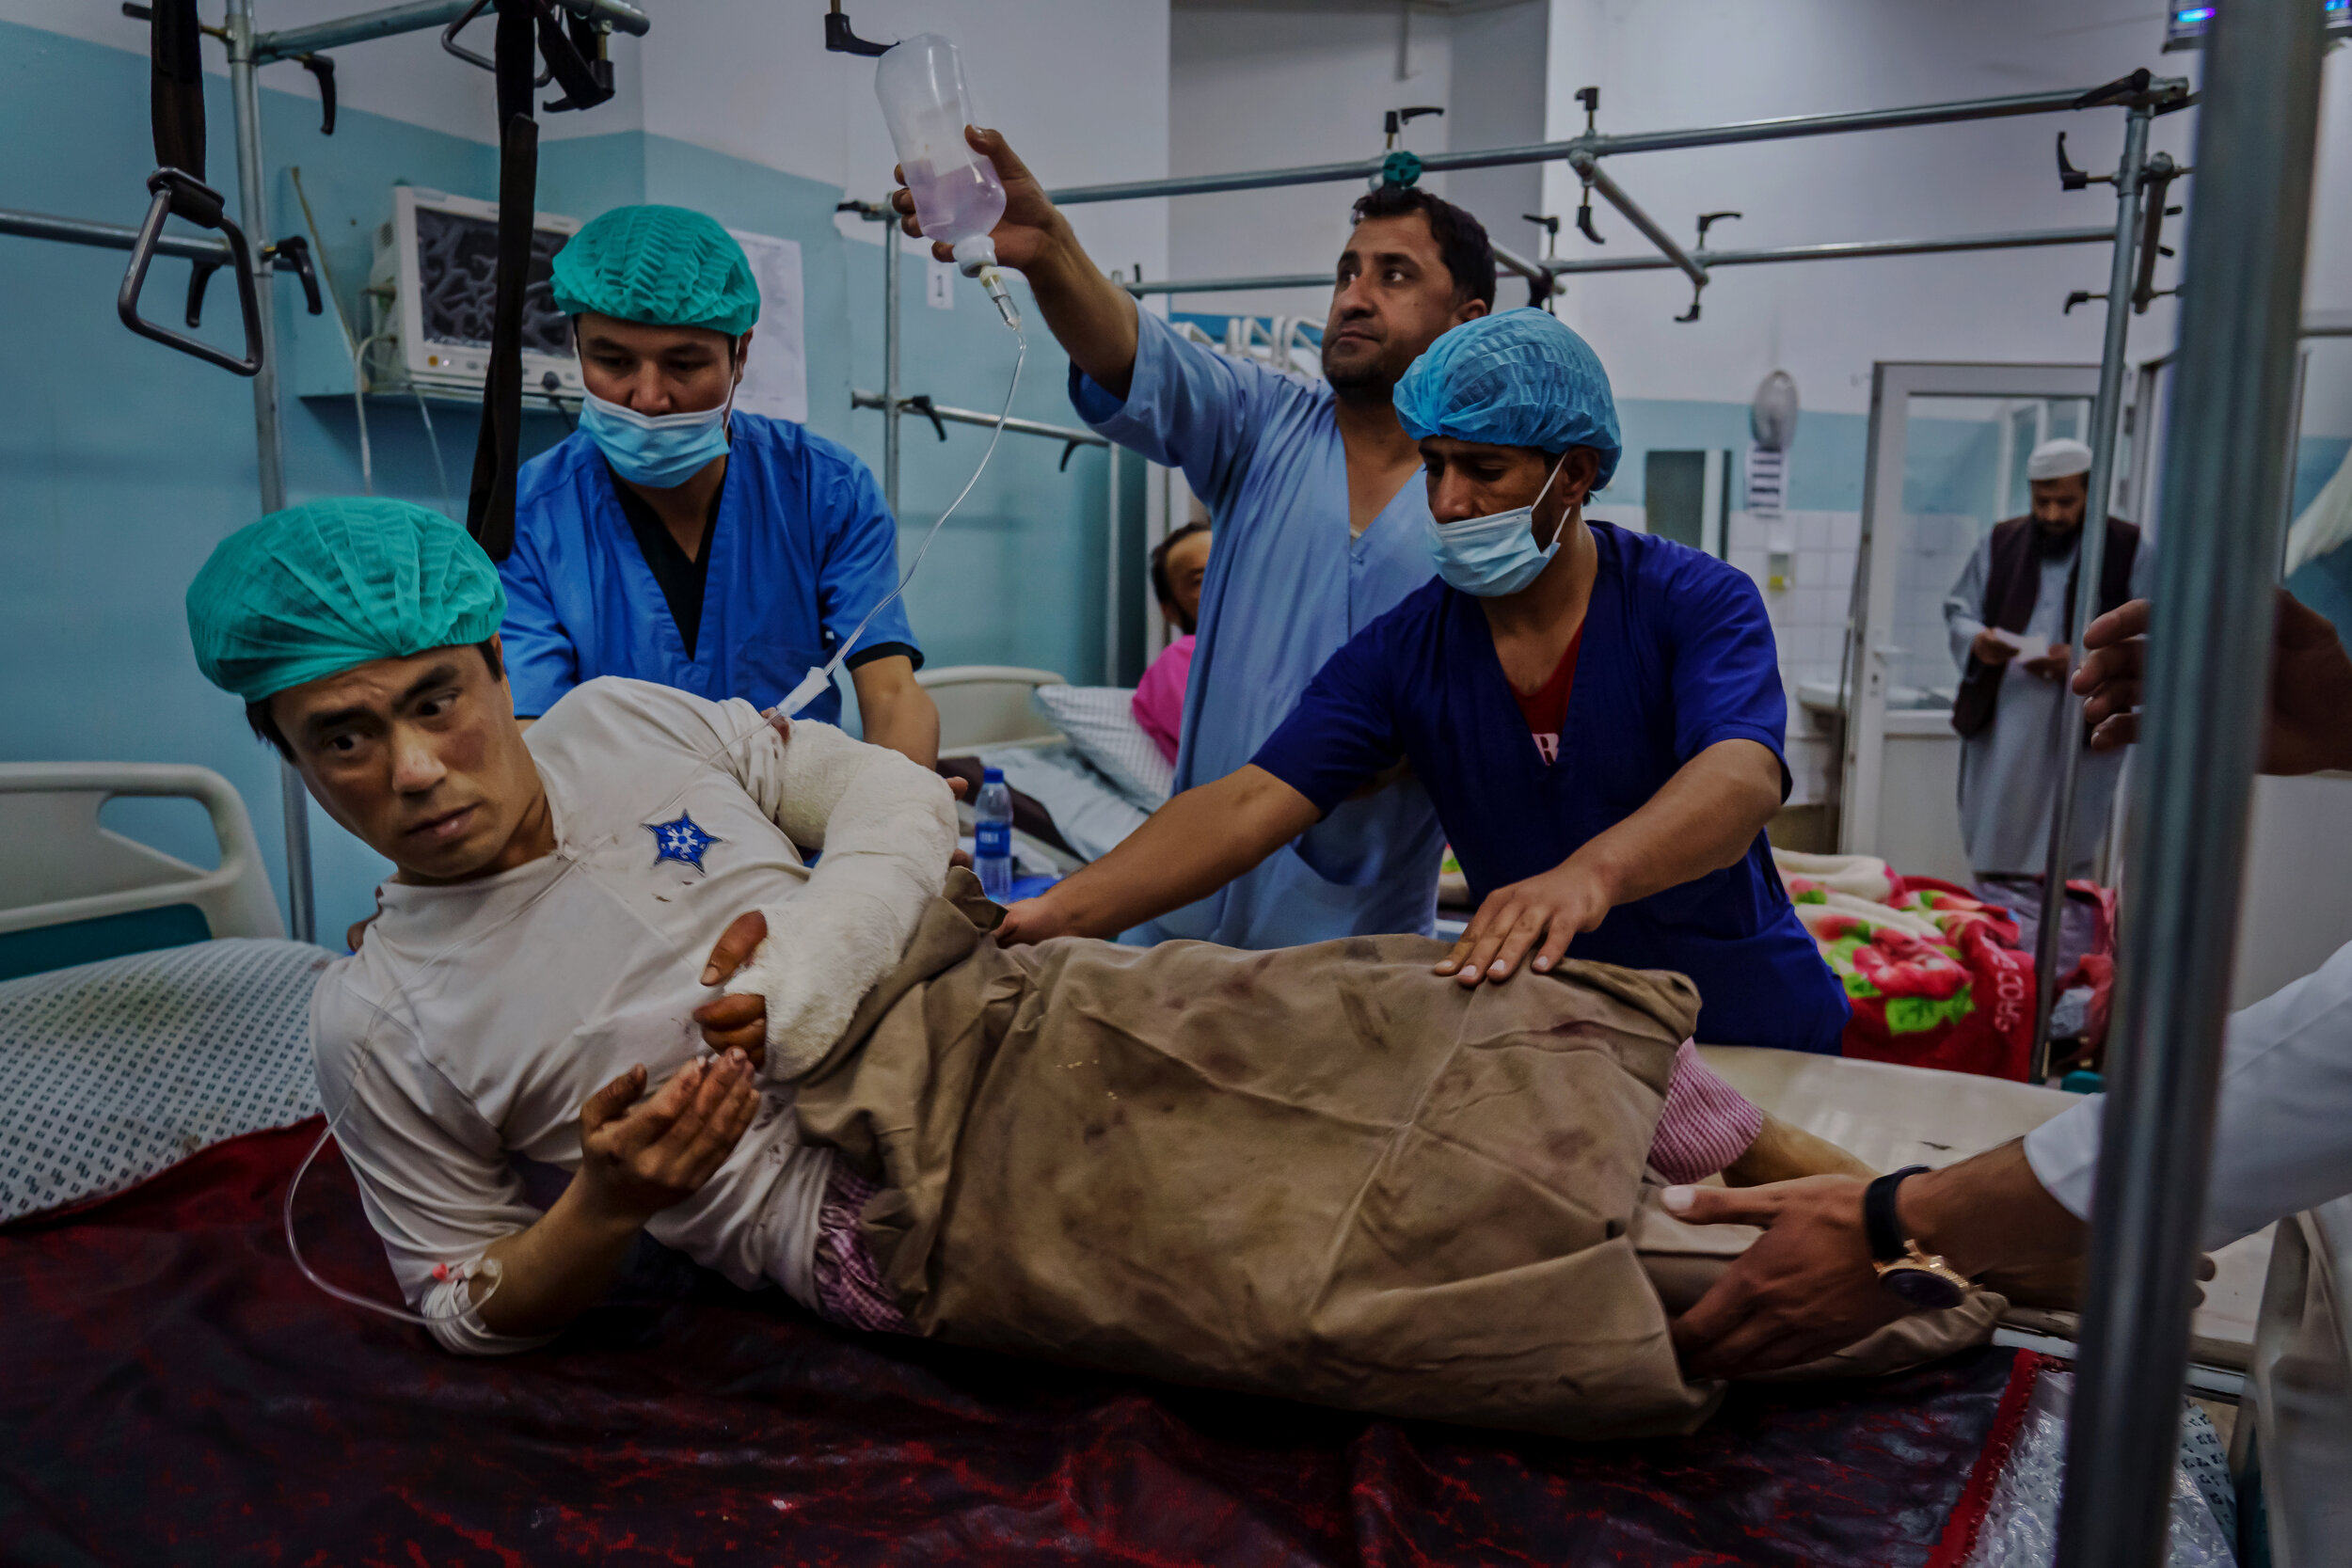  Medical staff move Mohammad Sadeqe, 33, out of the operating theater, after Sadeqe, a forensic medicine teacher was injured after an attack on Kabul University, AfghanistanÕs largest university, where three gunmen fired weapons and detonated explosi